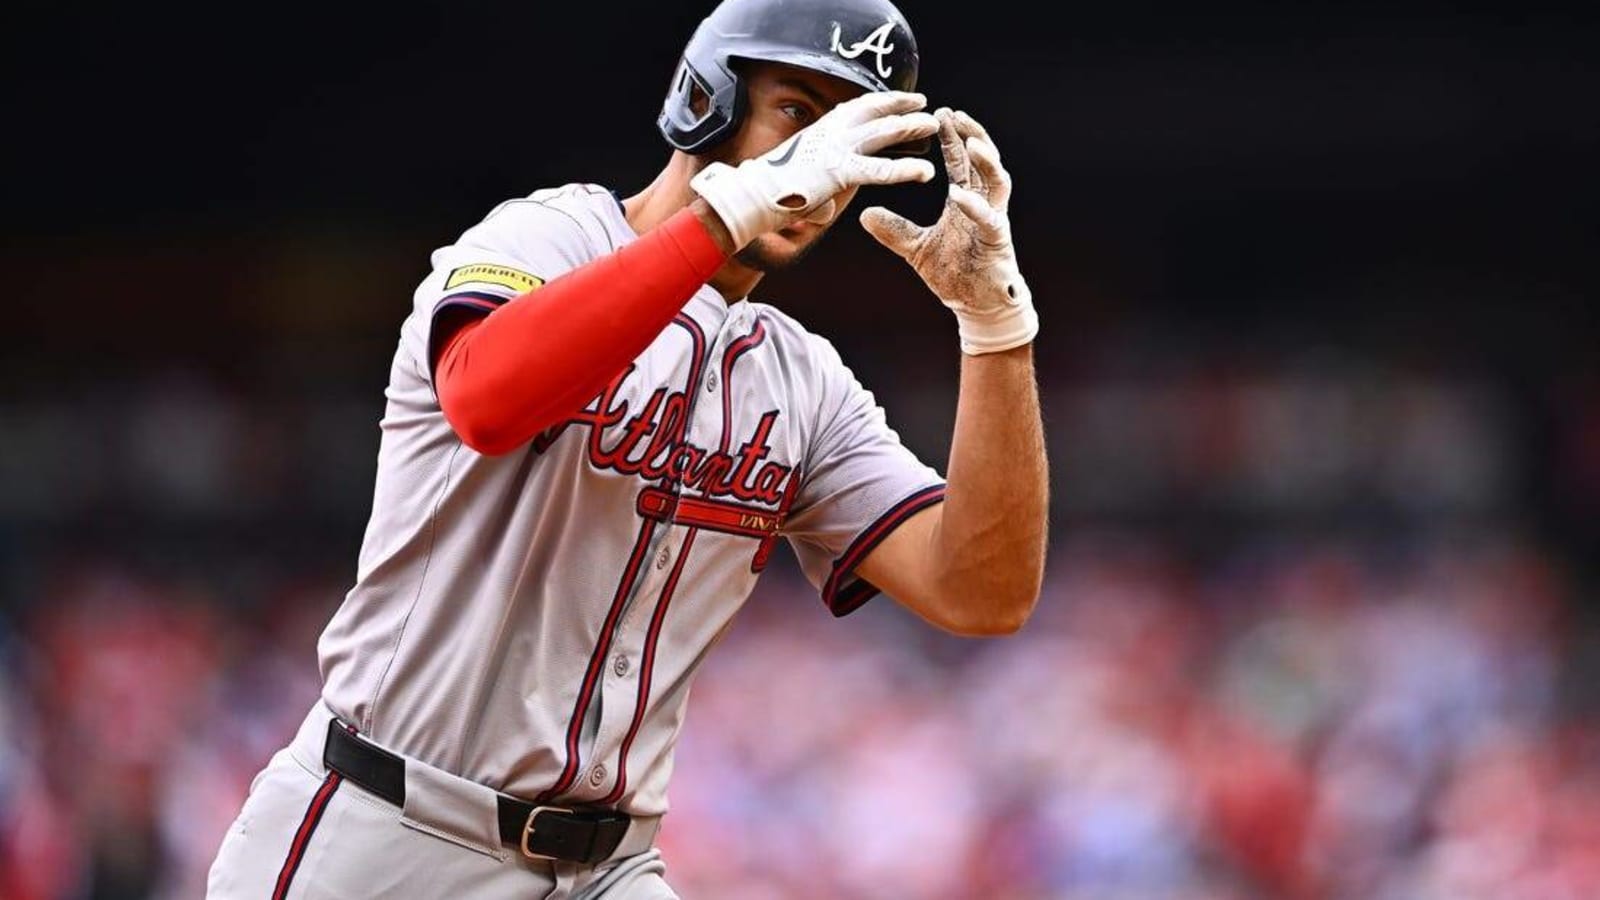 Braves pour it on with 19-hit attack to crush Phillies